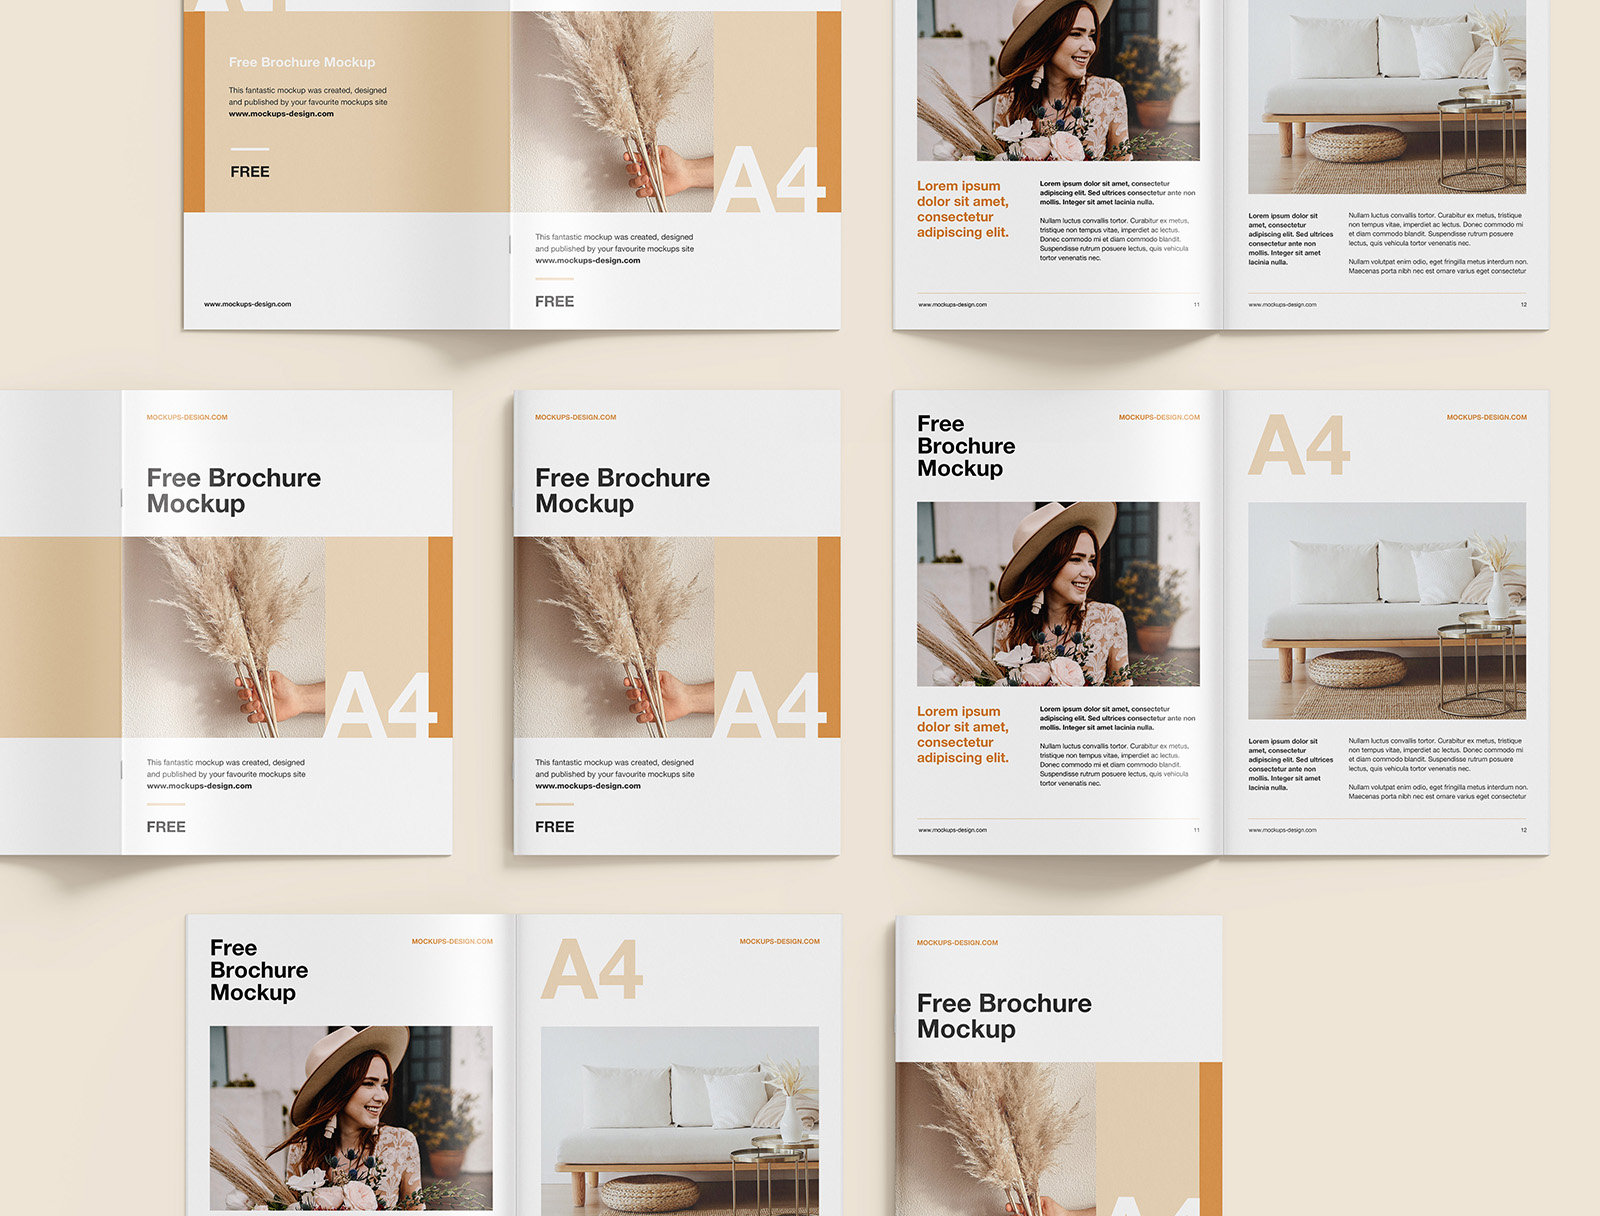 2 A4 Brochure Grid Mockups in Various Sights FREE PSD